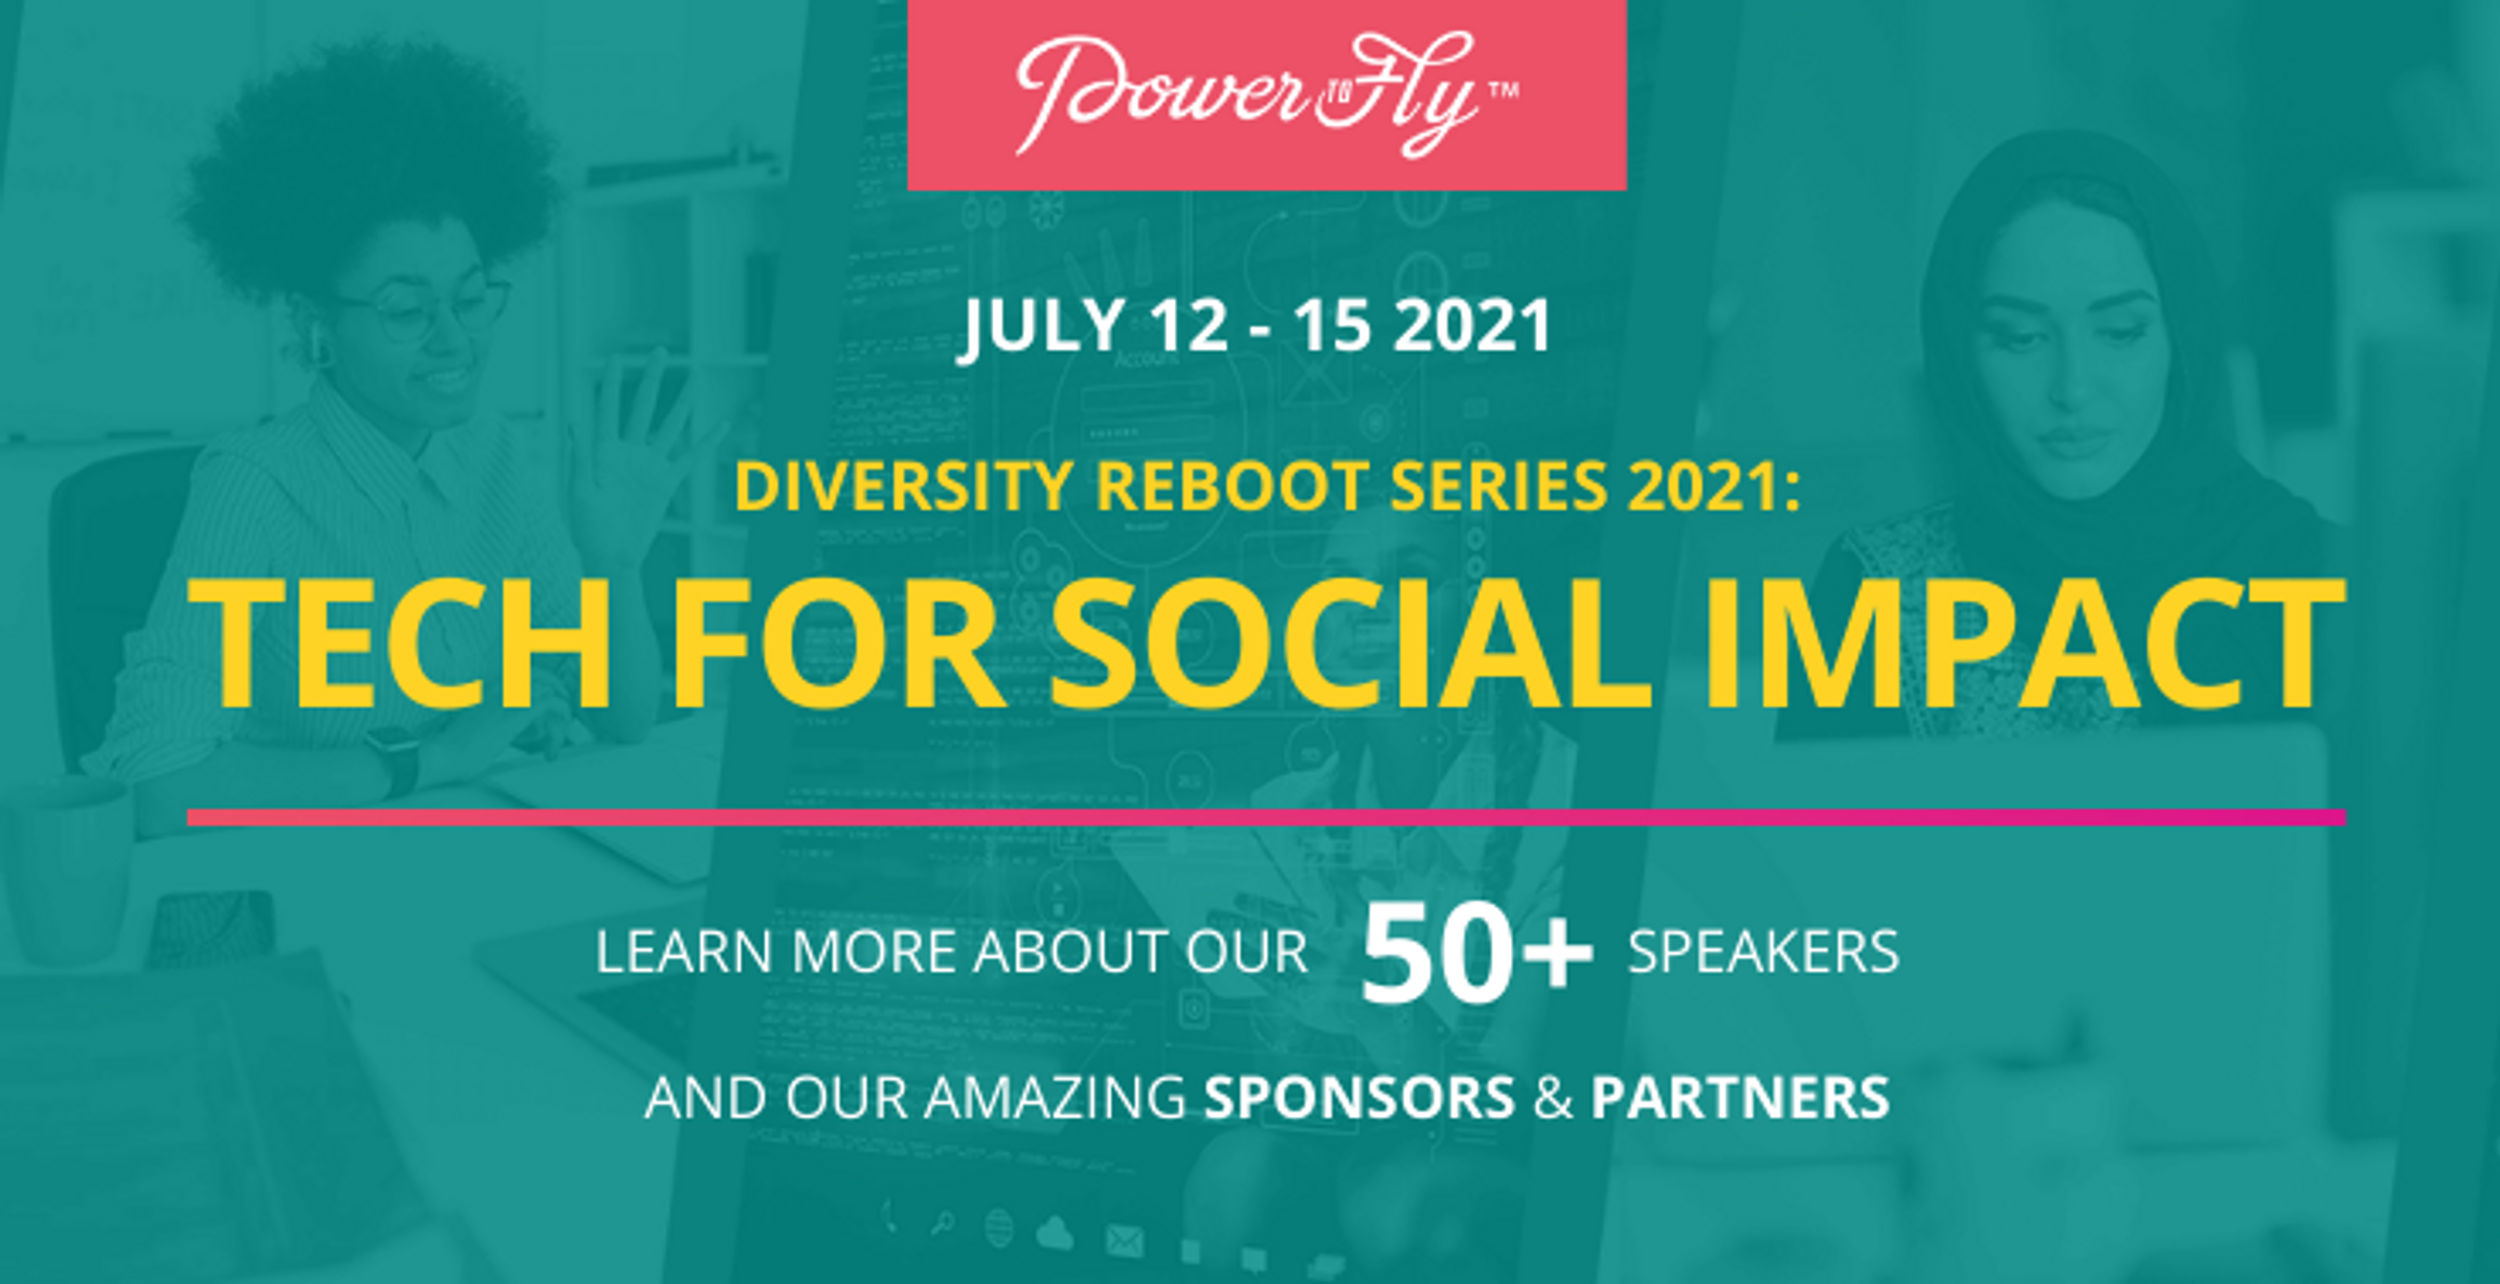 Tech for Social Impact: Learn more about Our Partners, Sponsors & Speakers